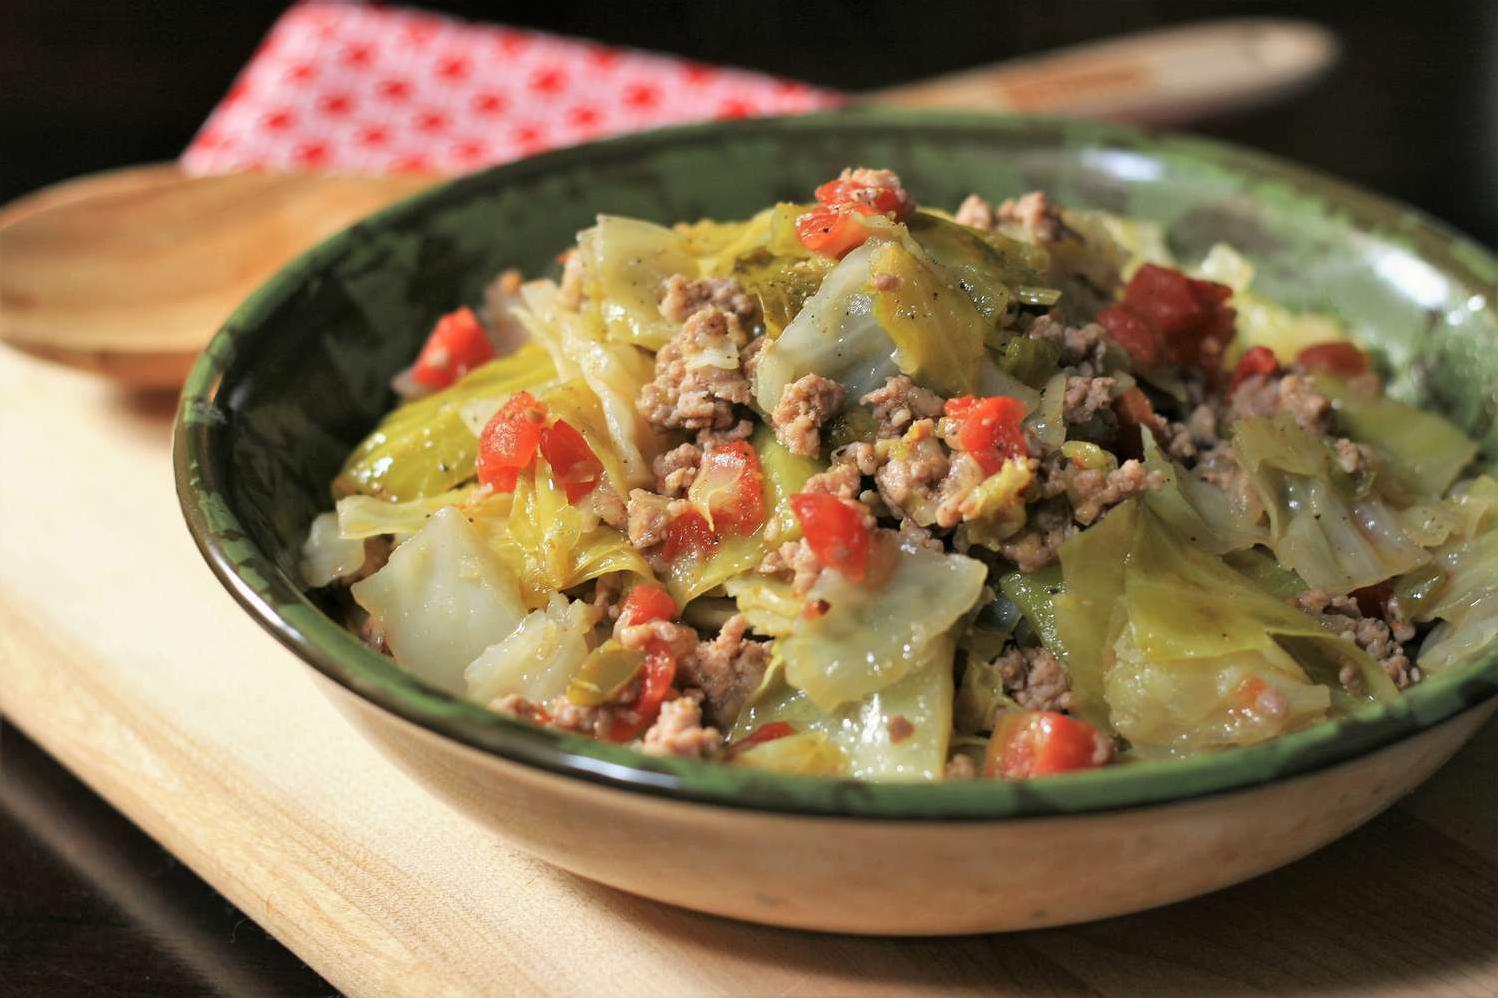  Comfort food at its best: Smothered Cabbage